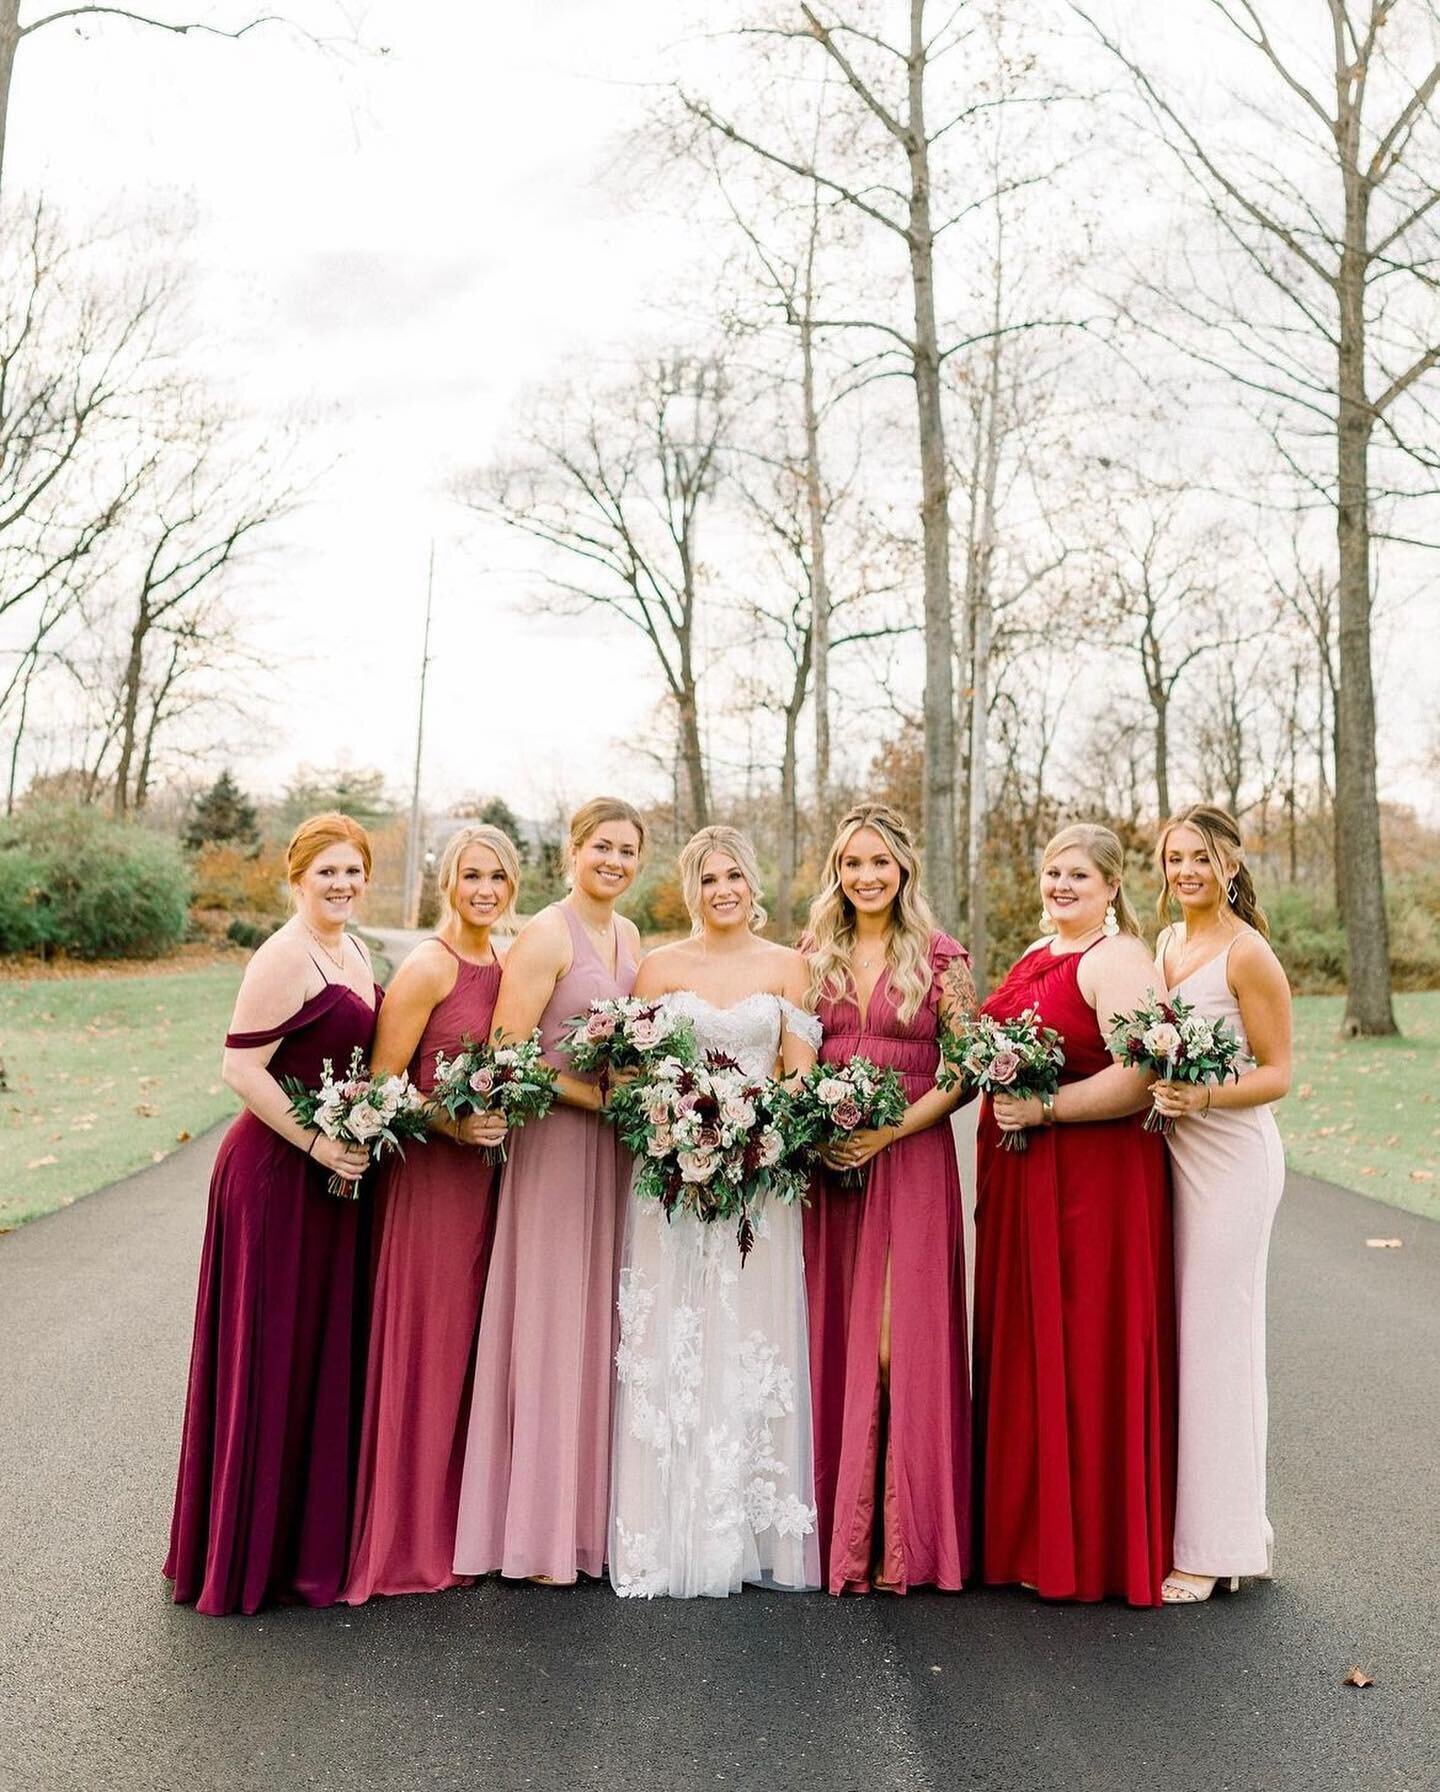 Today we&rsquo;re talking bridal party size. 💐Did you know that personal flowers alone (bouquets, boutonni&egrave;res, etc.) eat up around $1,500-$2,500 of the average floral budget? It&rsquo;s definitely something to consider when deciding who will